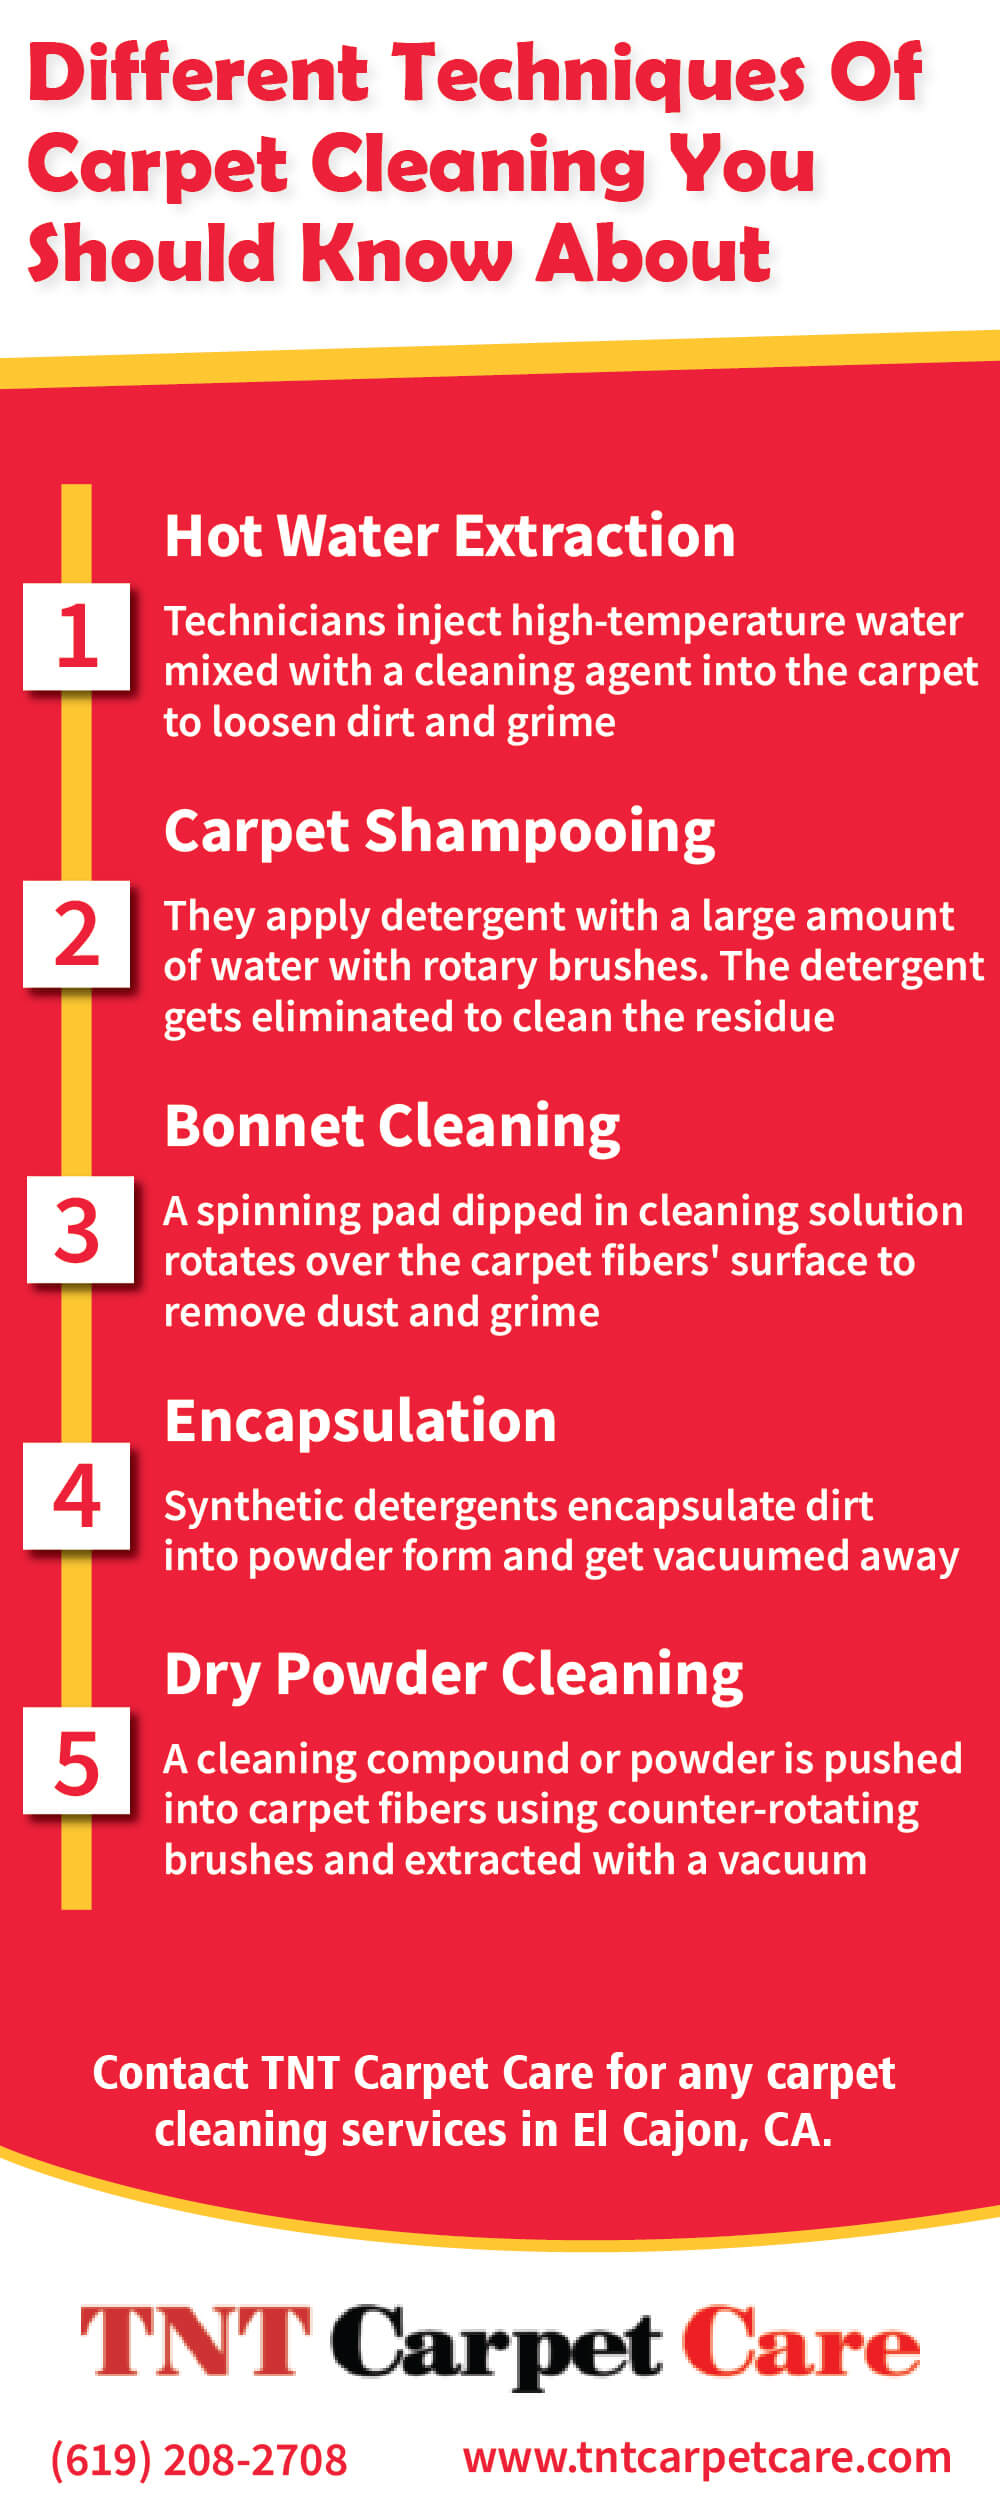 Different Techniques Of Carpet Cleaning You Should Know About